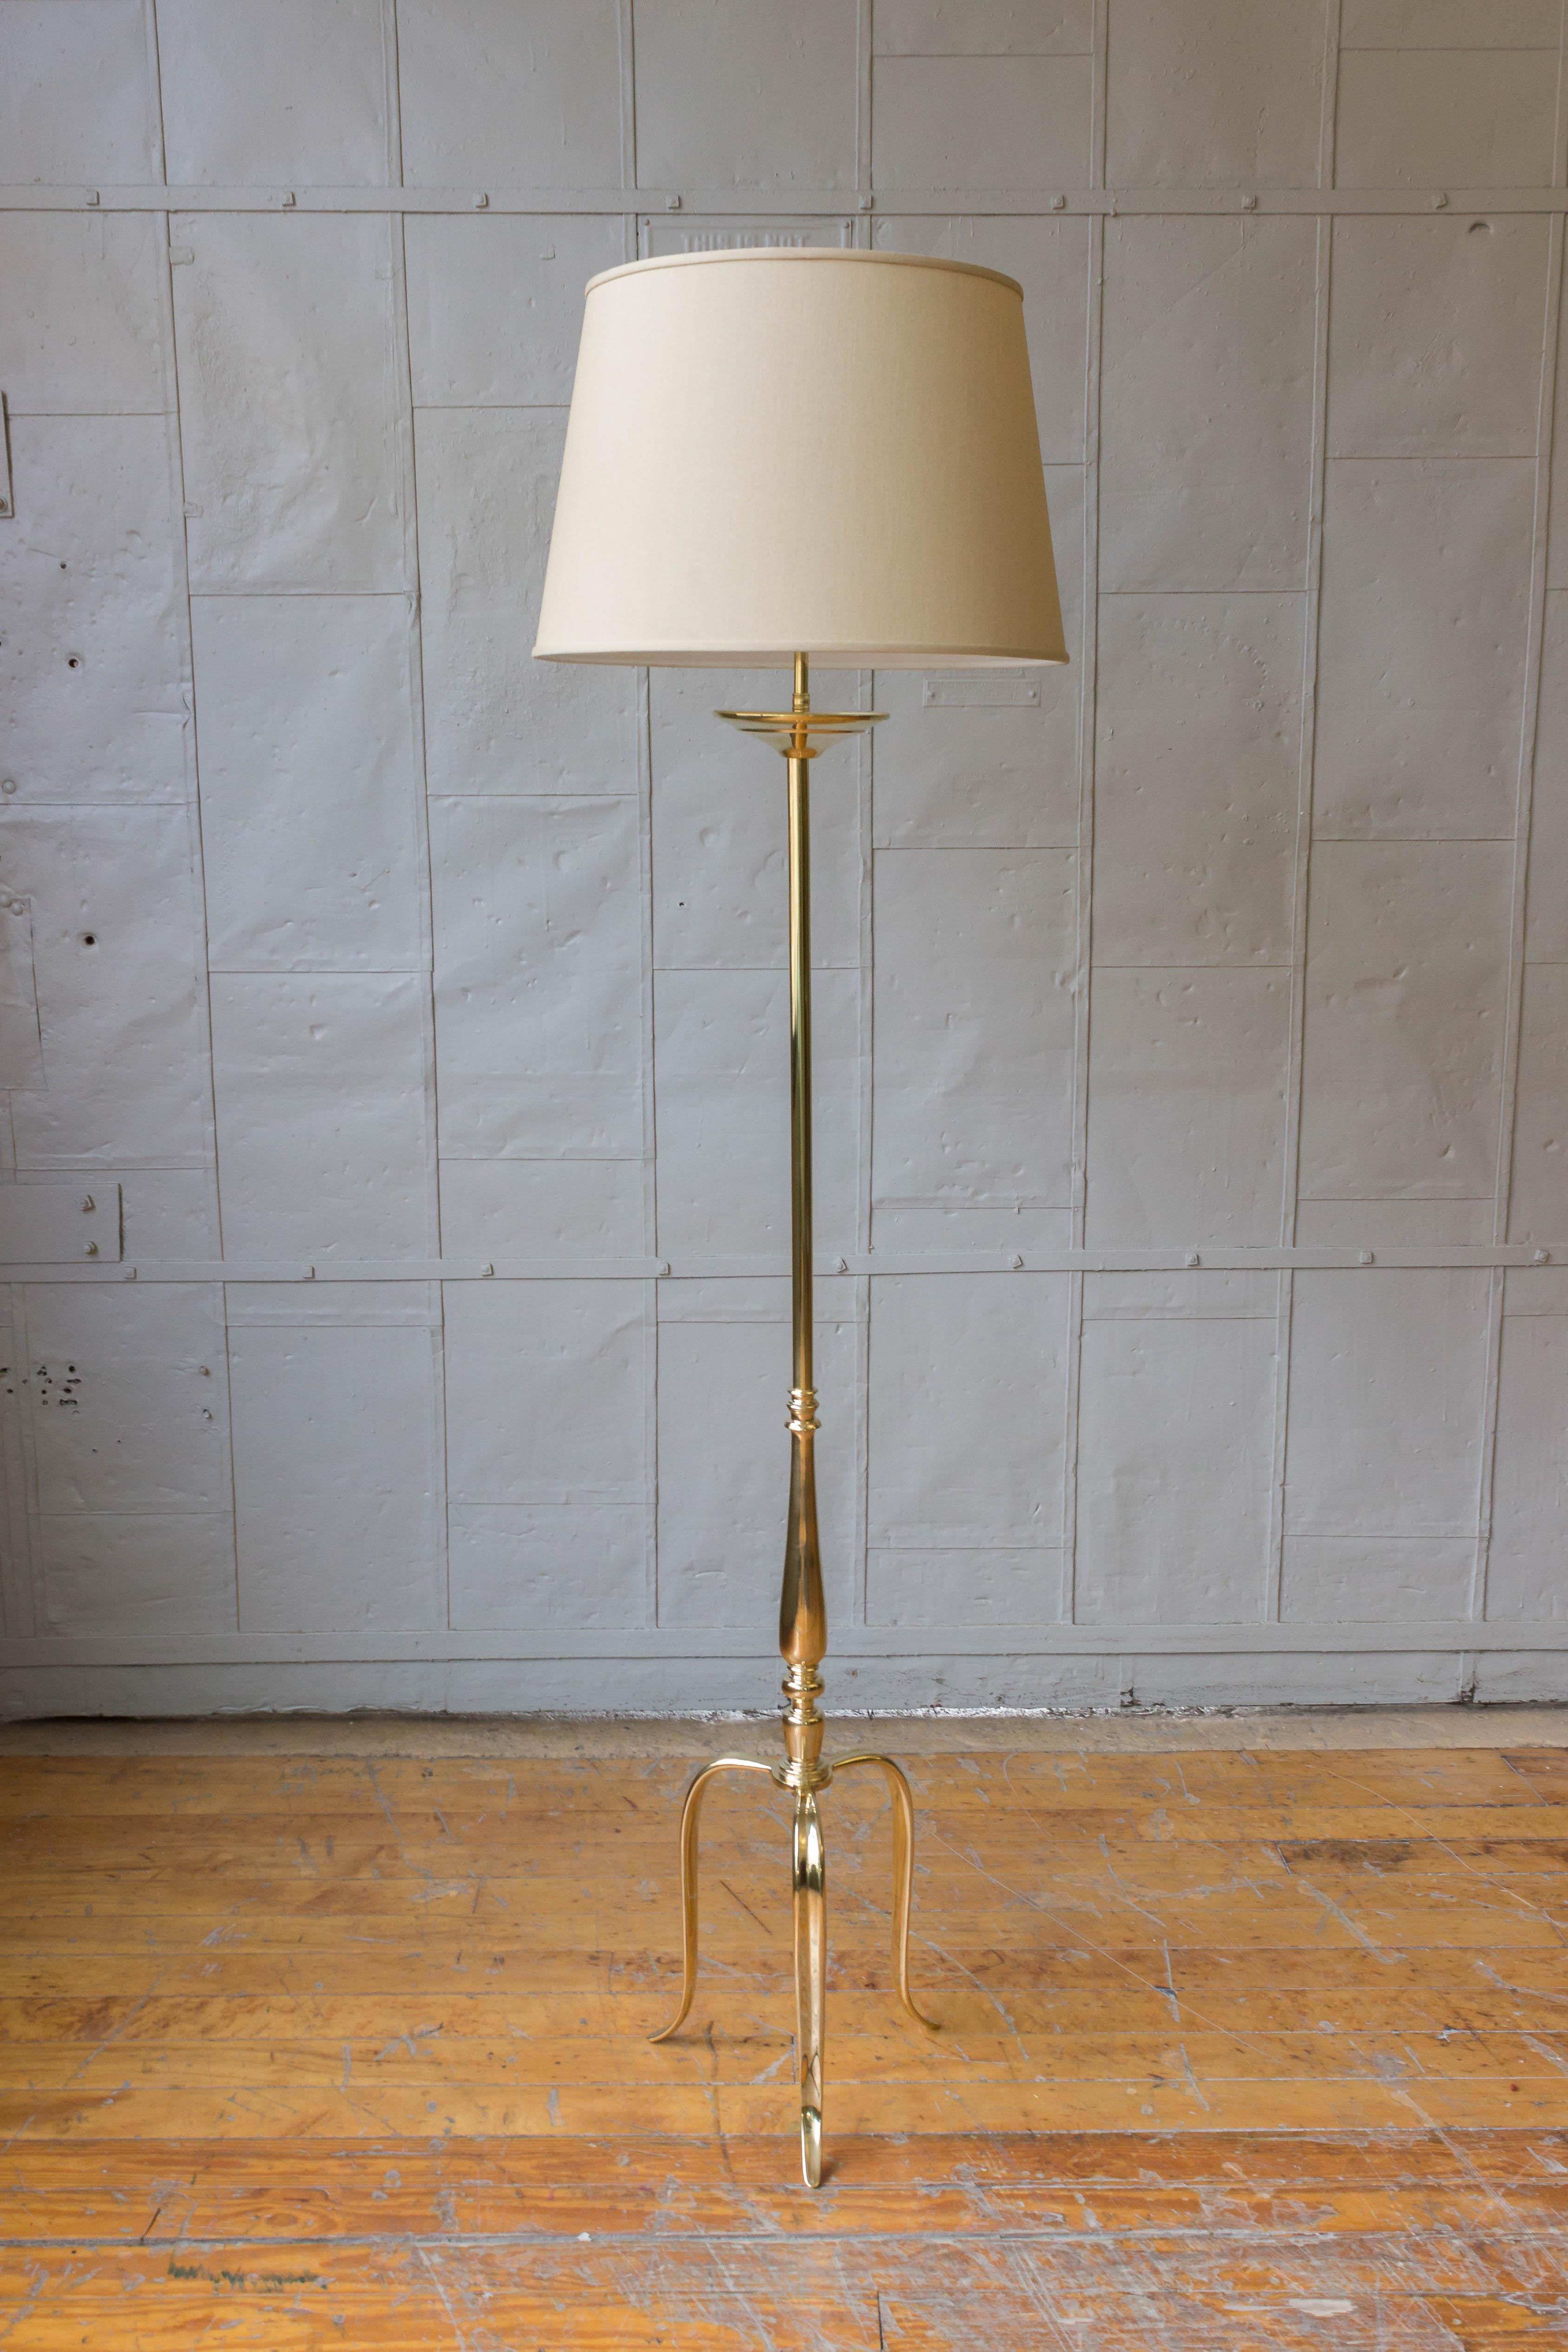 Mid-Century Modern brass floor lamp, recently plated in a nice polished brass finish with turned bronze stem parts on a tripod base. The lamp has recently been rewired with a double cluster. Not UL wired. French, circa 1950s.

Custom feather